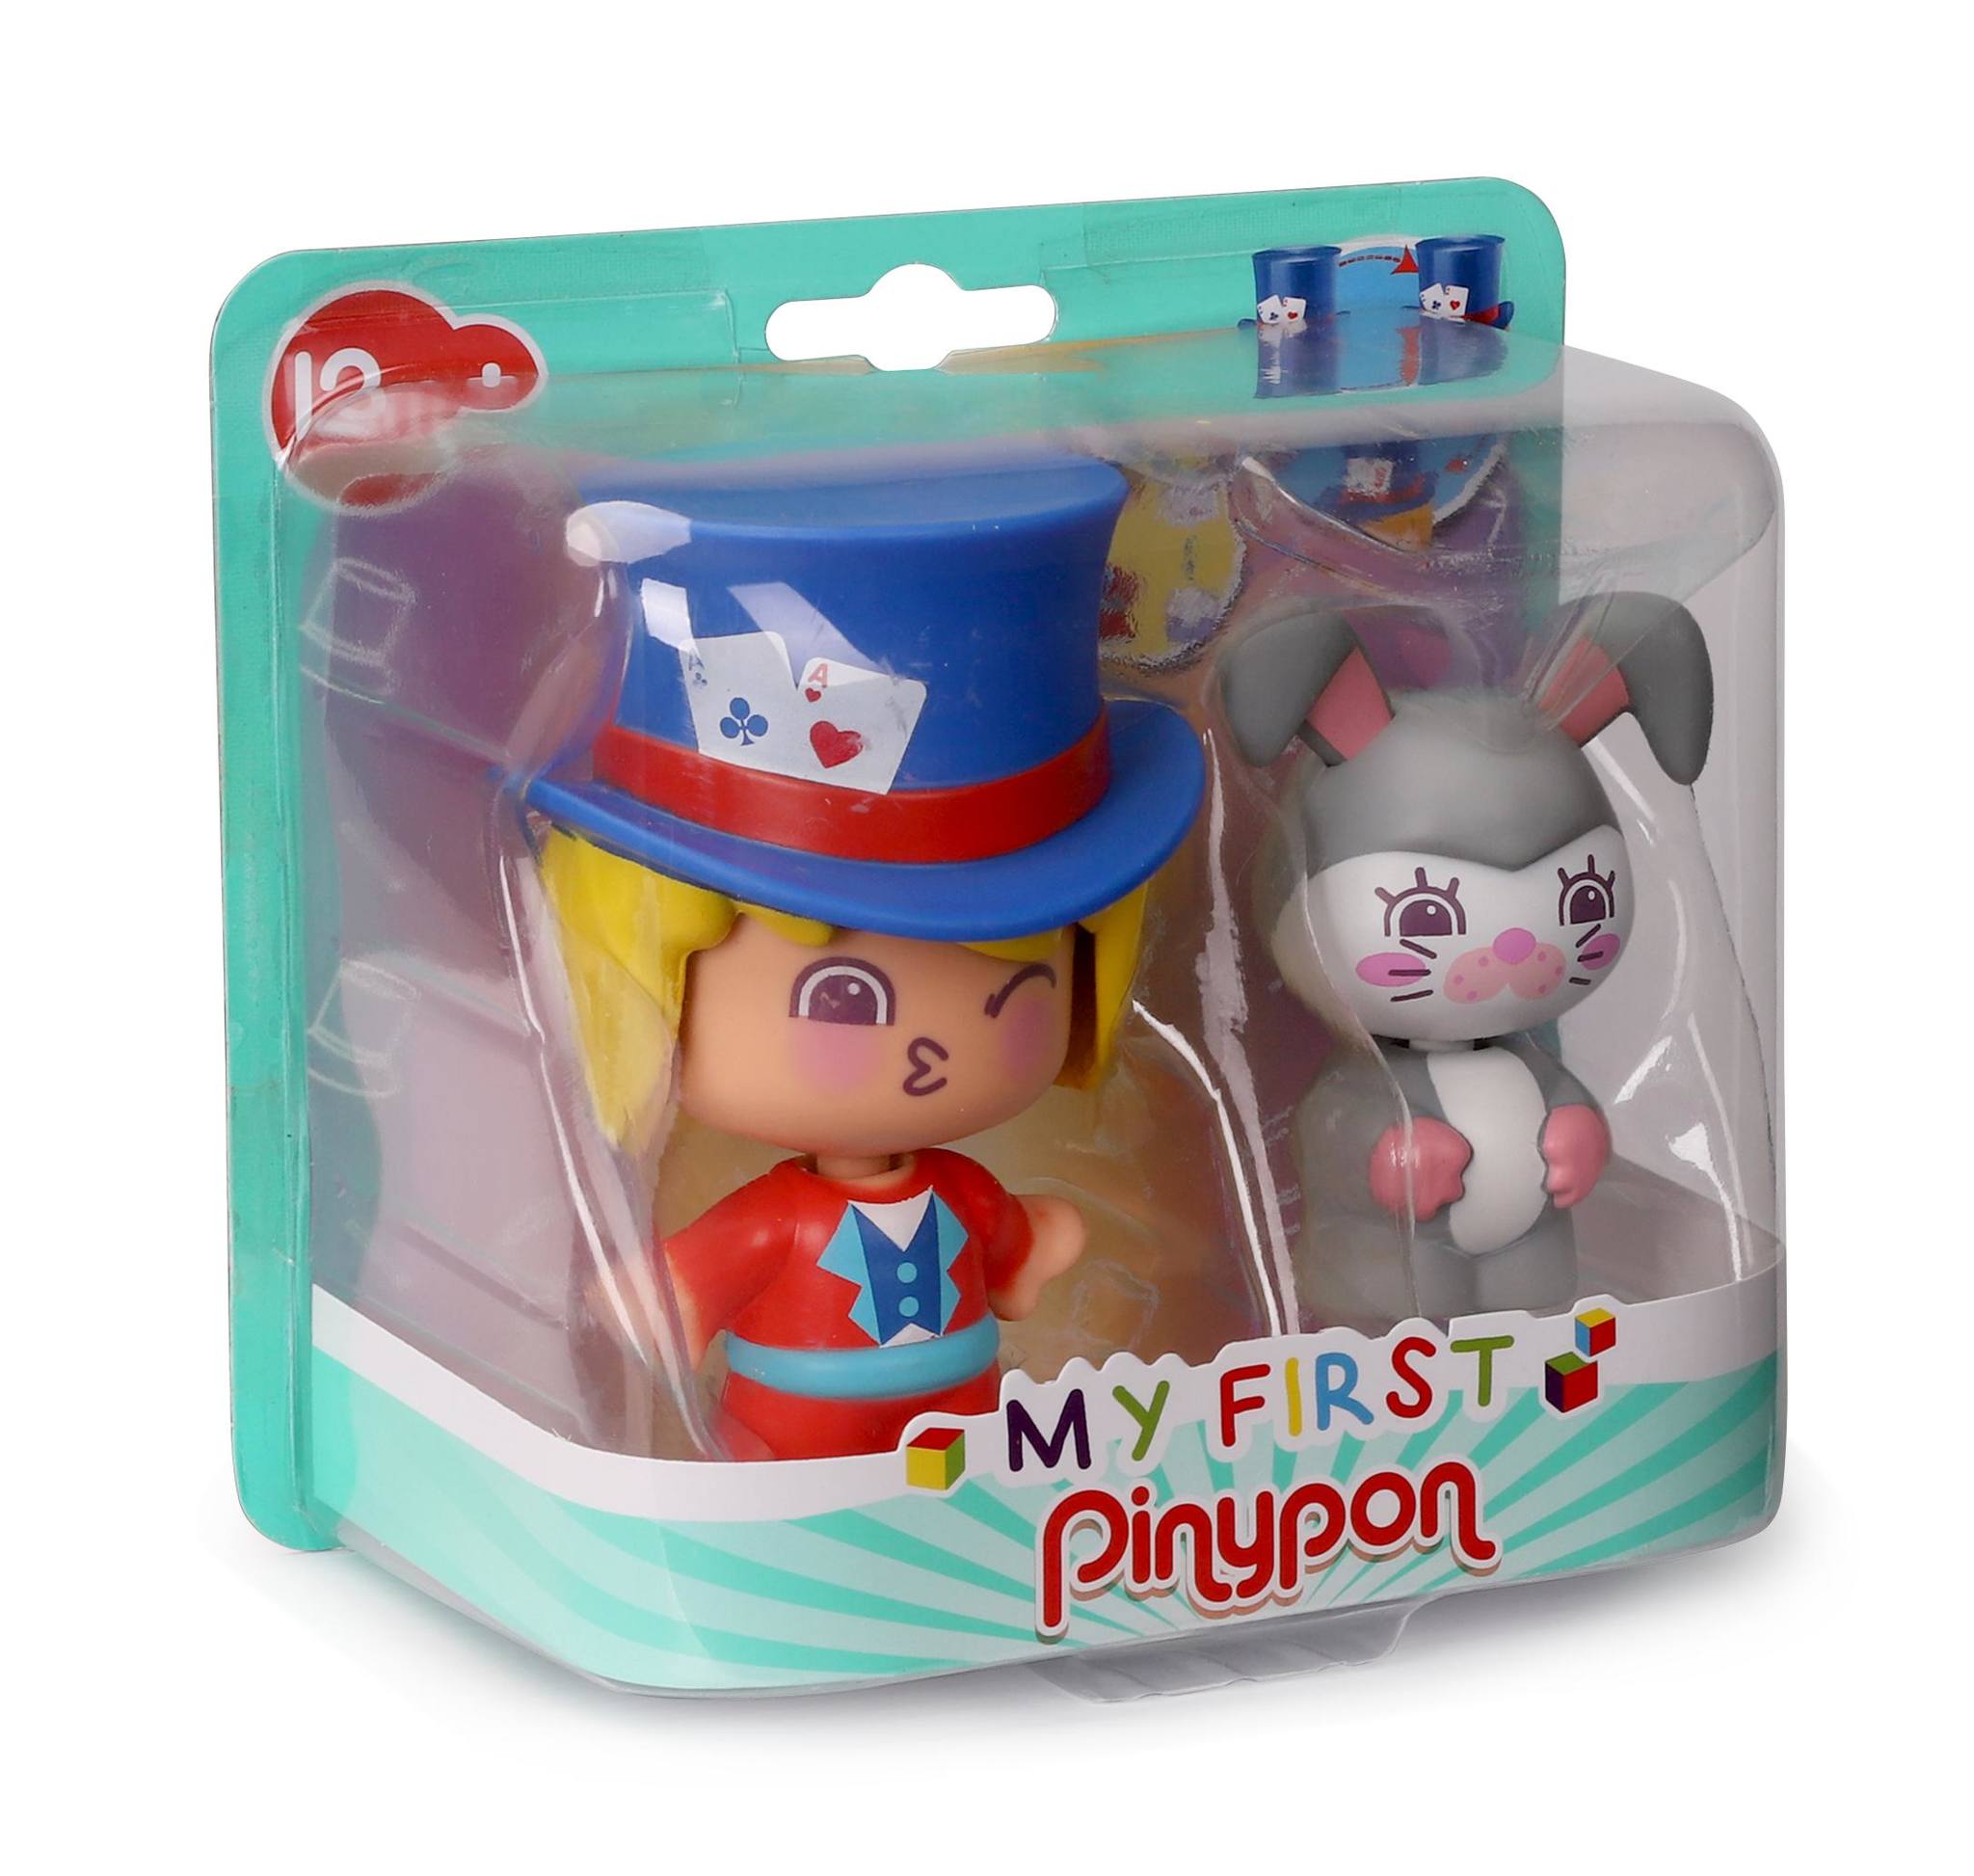 MY FIRST PIN Y PON PACK MAGICIAN 700017040